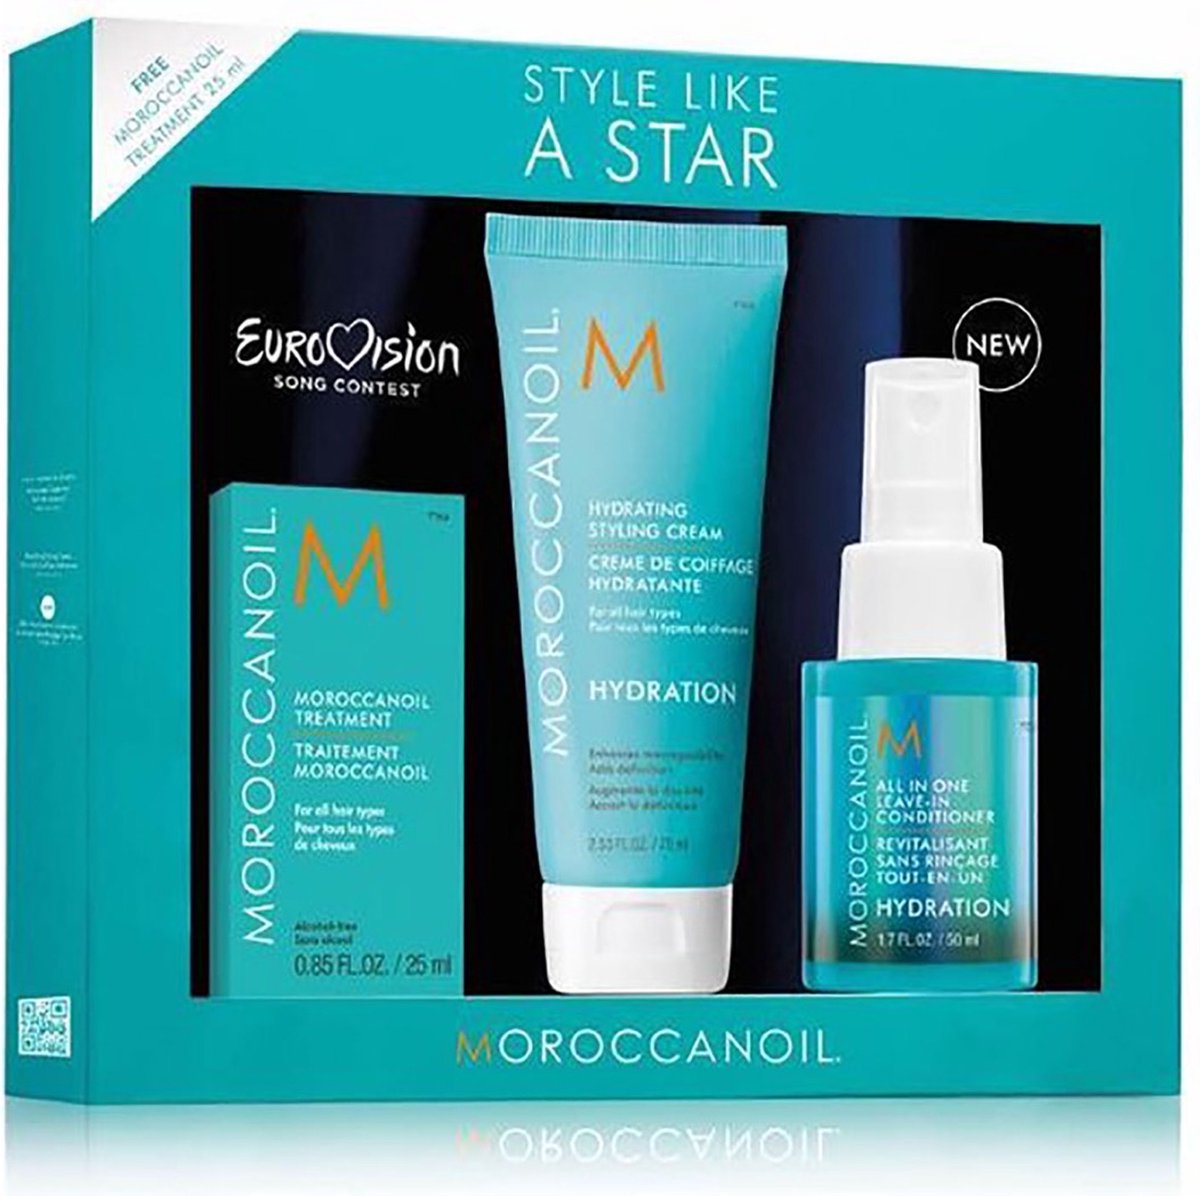 Moroccanoil Eurovision Song Contest Style Like A Star Original Set